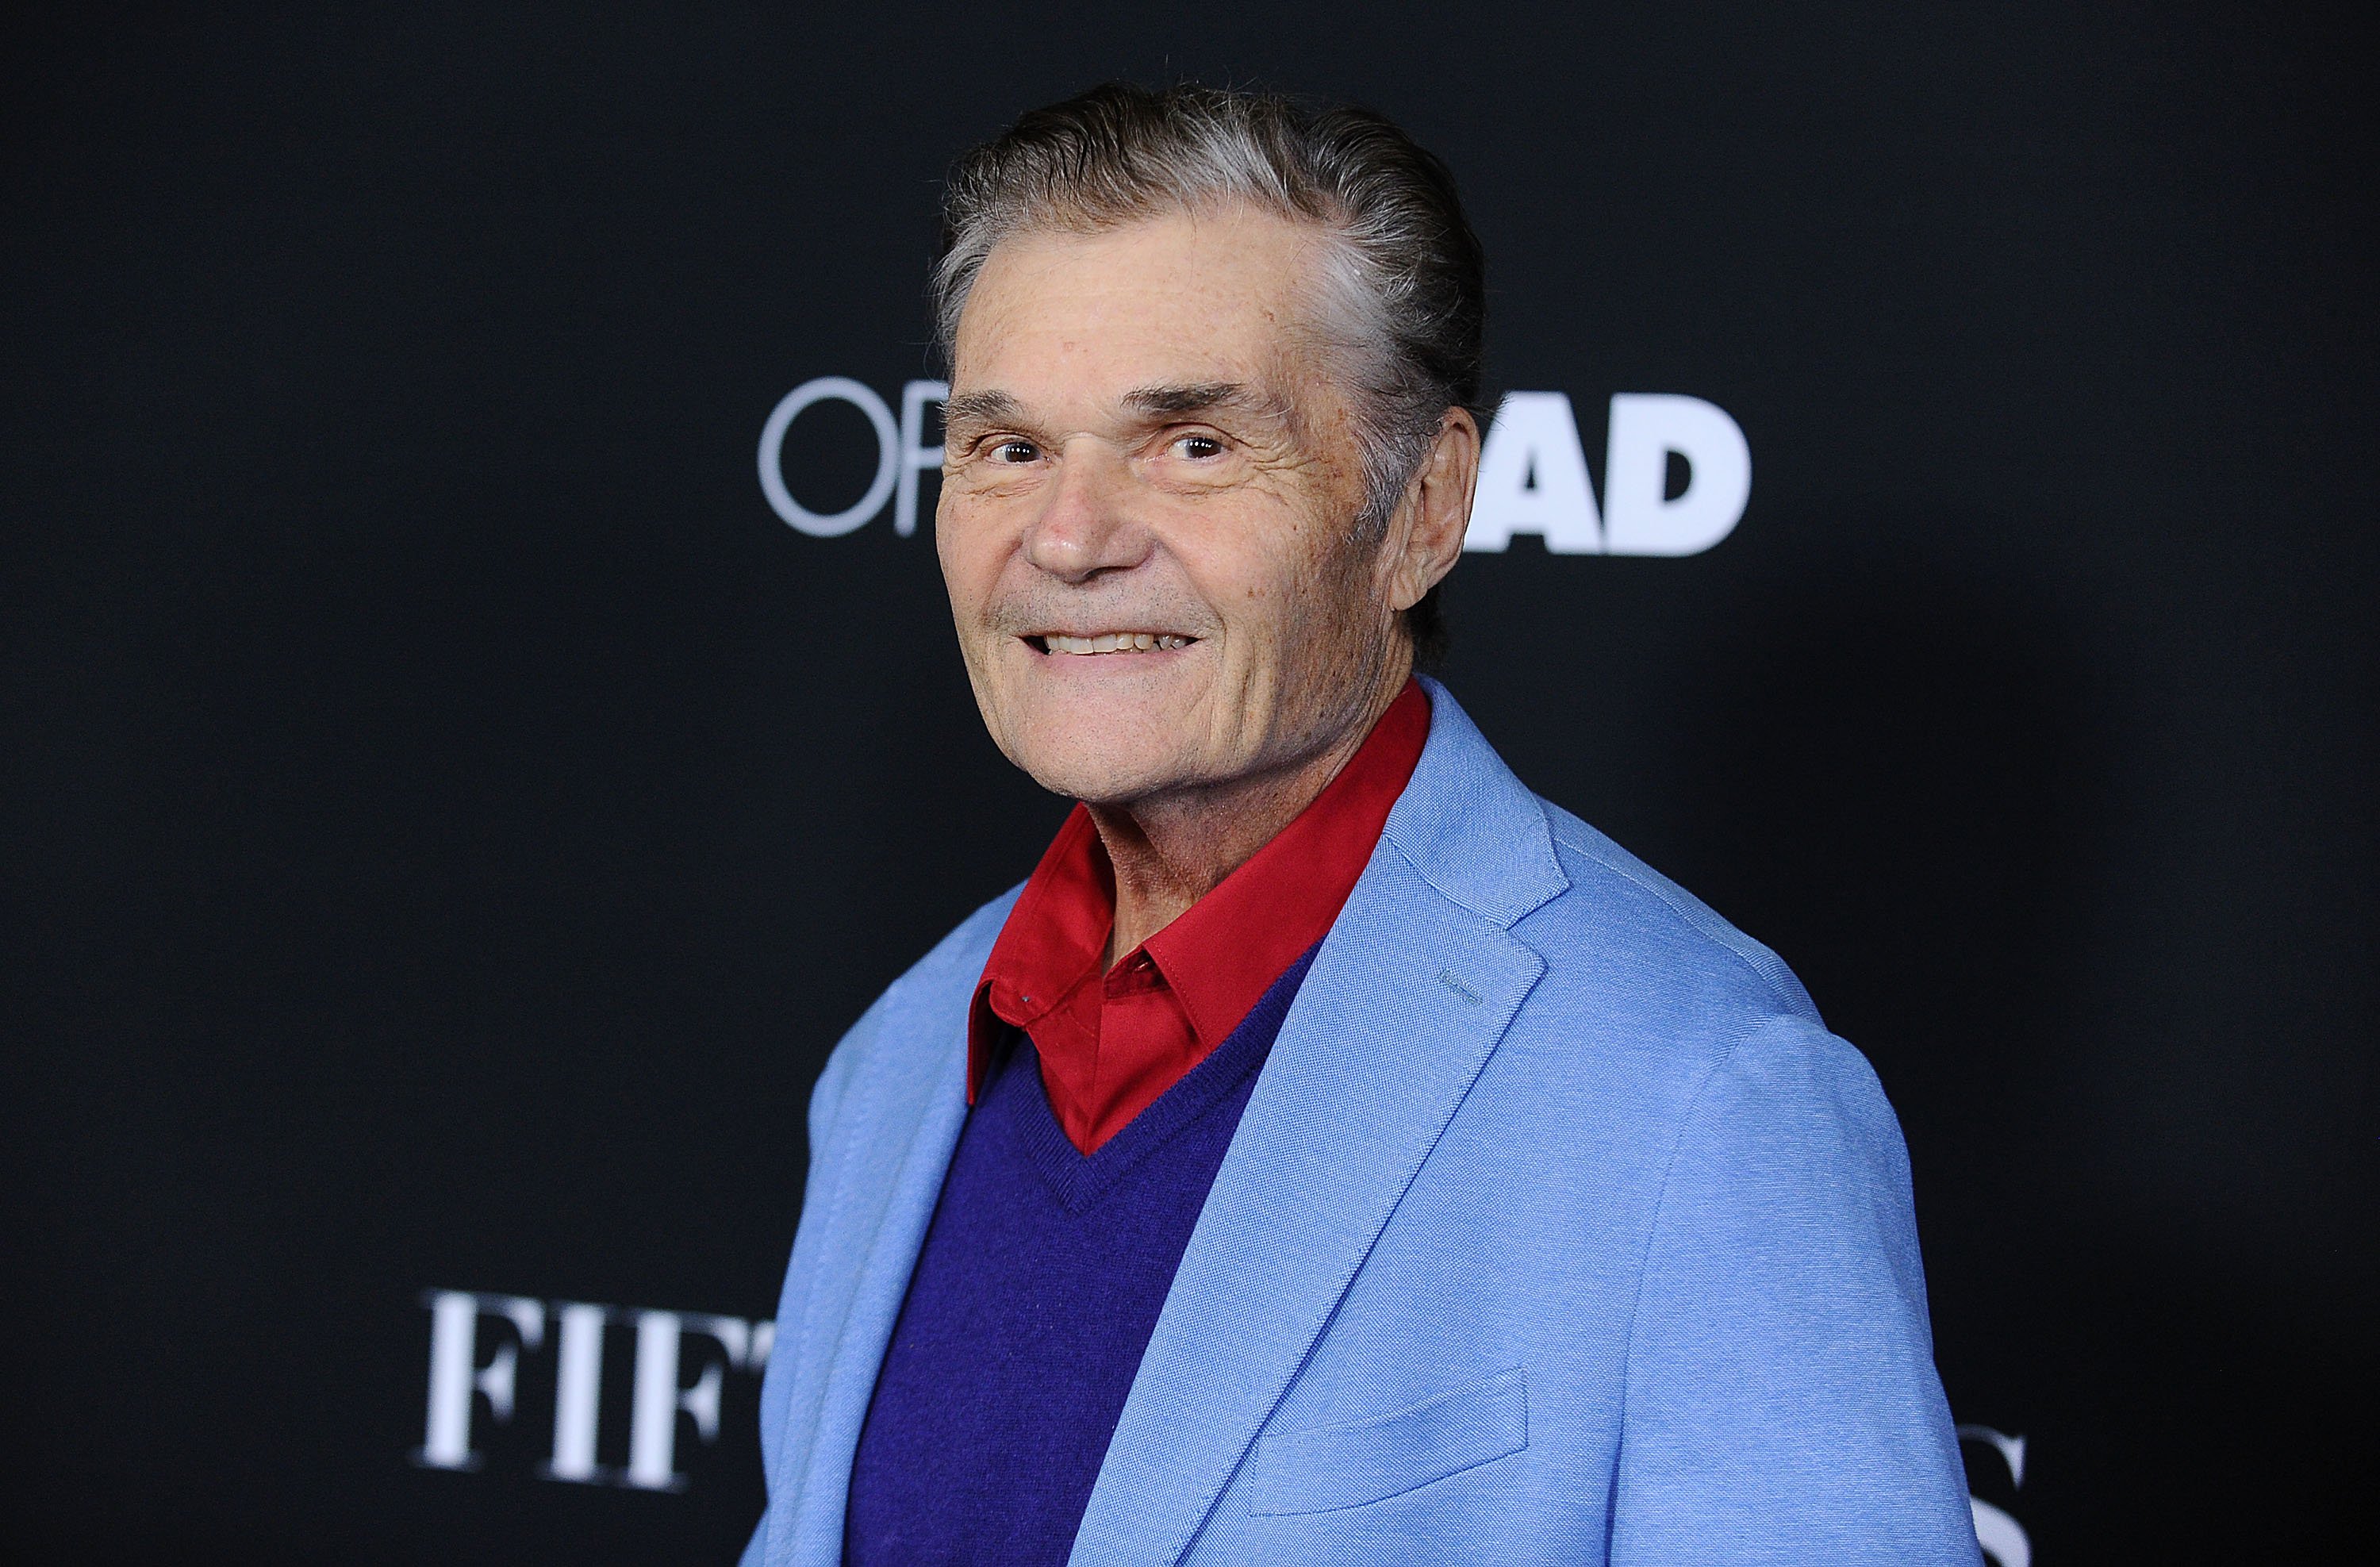 Fred Willard attends the premiere of "Fifty Shades of Black" on January 26, 2016, in Los Angeles, California. | Source: Getty Images. 